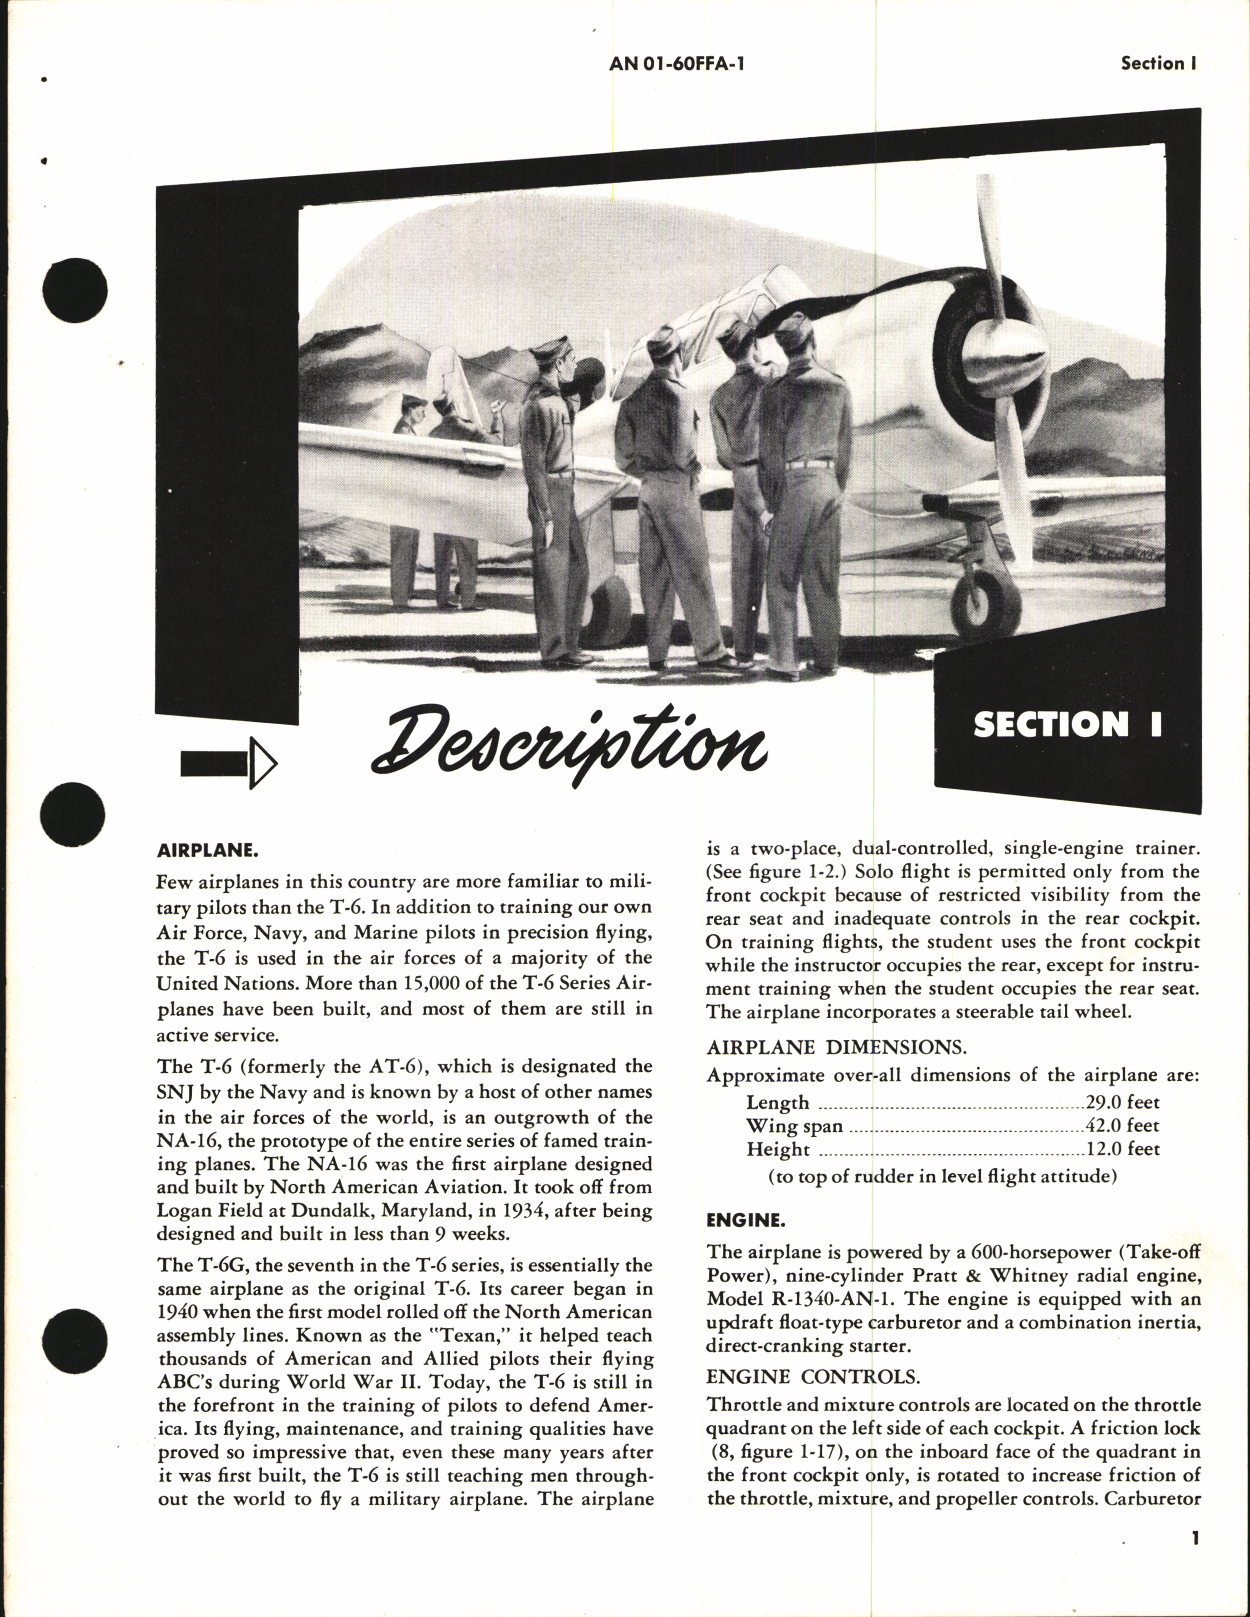 Sample page 7 from AirCorps Library document: Flight Handbook for T-6G